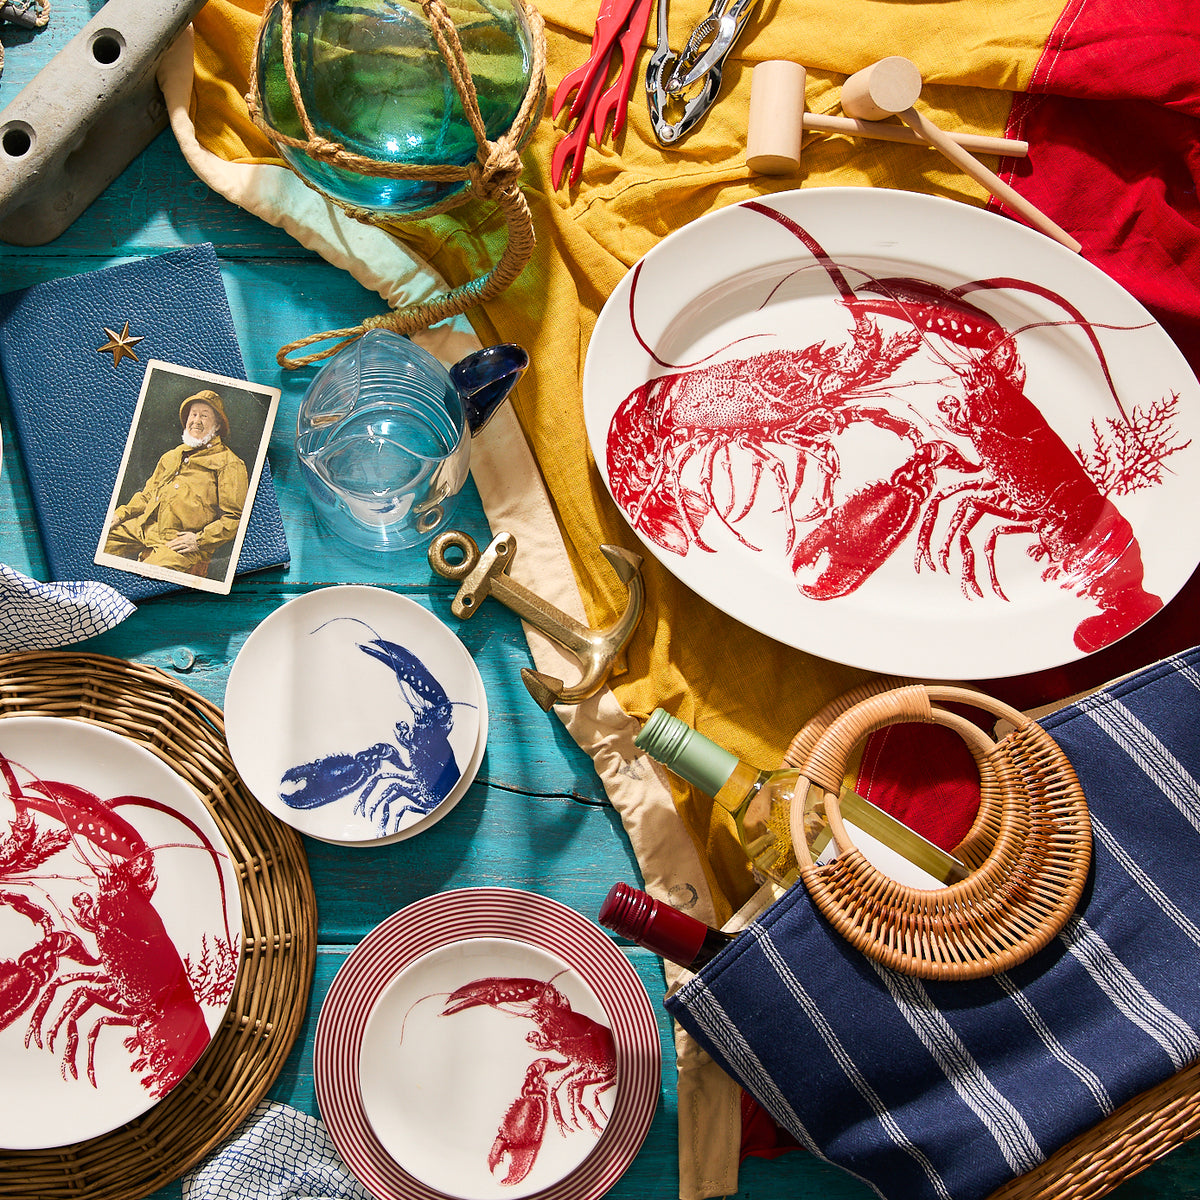 A Caskata Artisanal Home Lobster Oval Rimmed Platter and various nautical items, including an old photo, folded yellow and red fabric, glass floats, and a striped cloth, arranged on a blue surface in true seaside style.